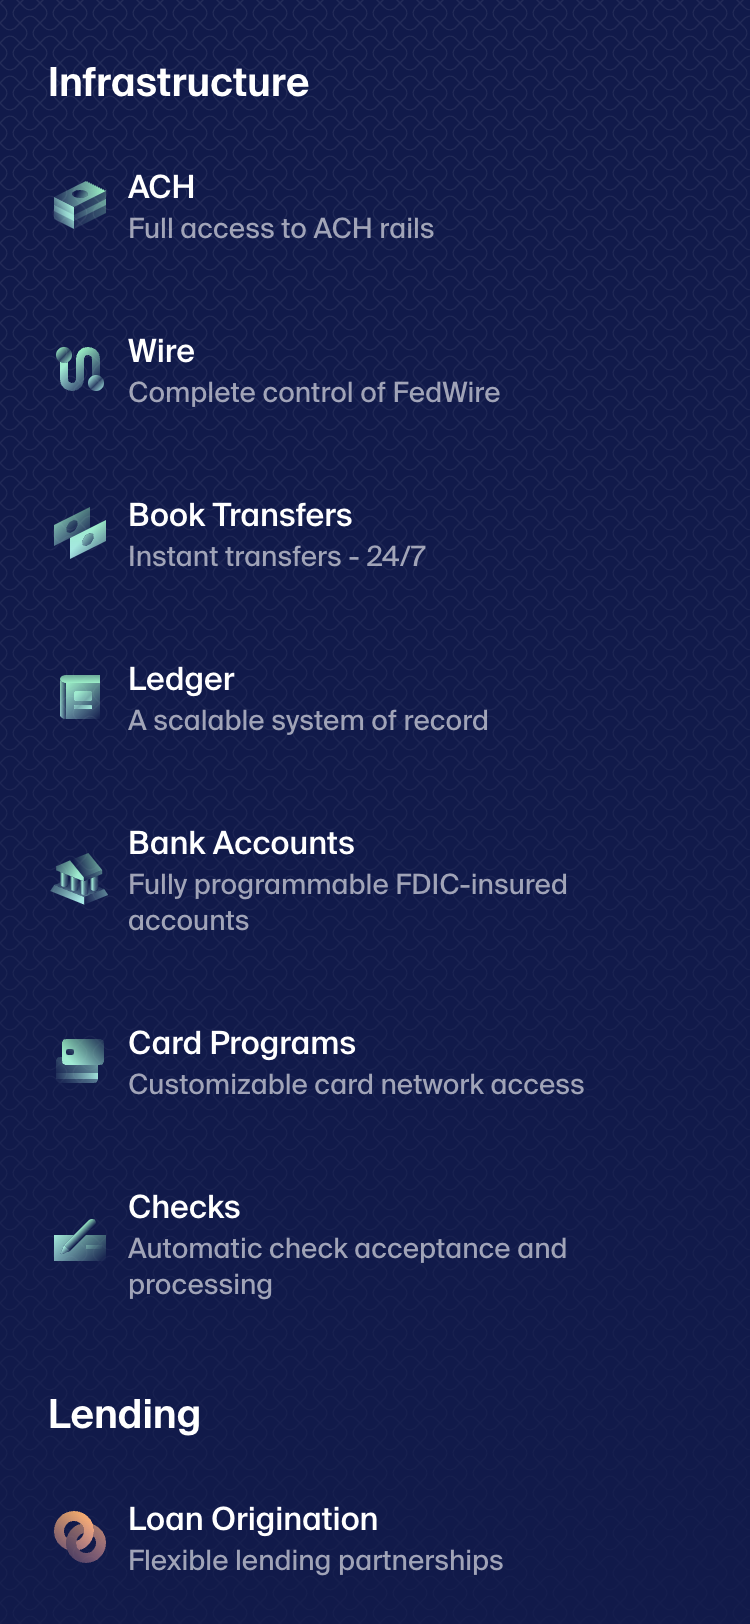 Mobile screenshot of a list of products on the Column website. The list contains items such as 'Book Transfers' and 'Bank Accounts', along with stylized icons and short descriptions of each.